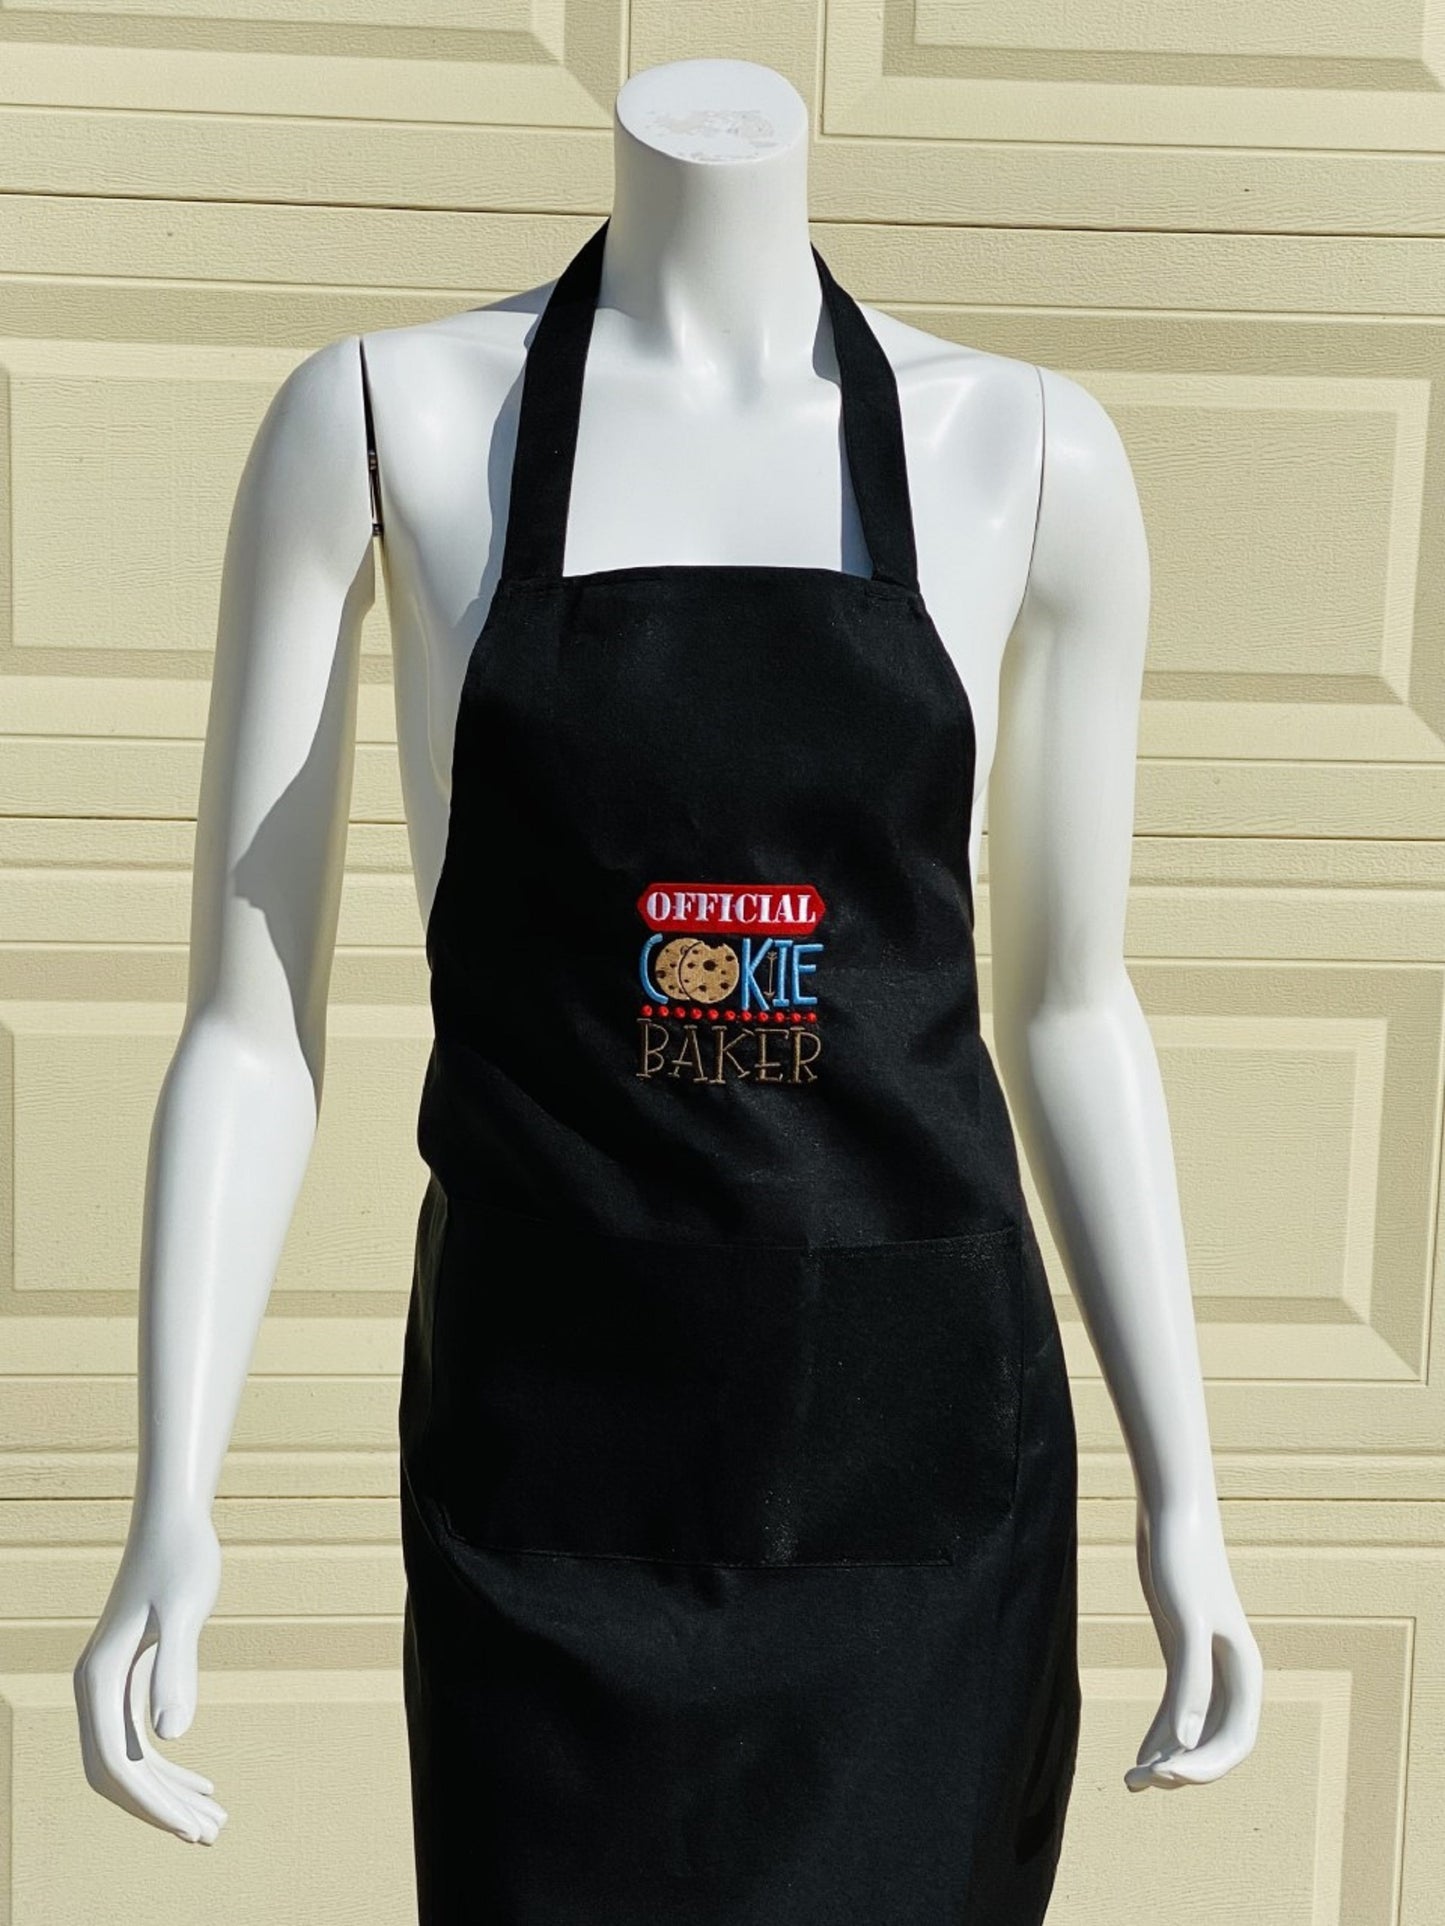 Official Cookie Baker-Black Apron-Machine Embroidered